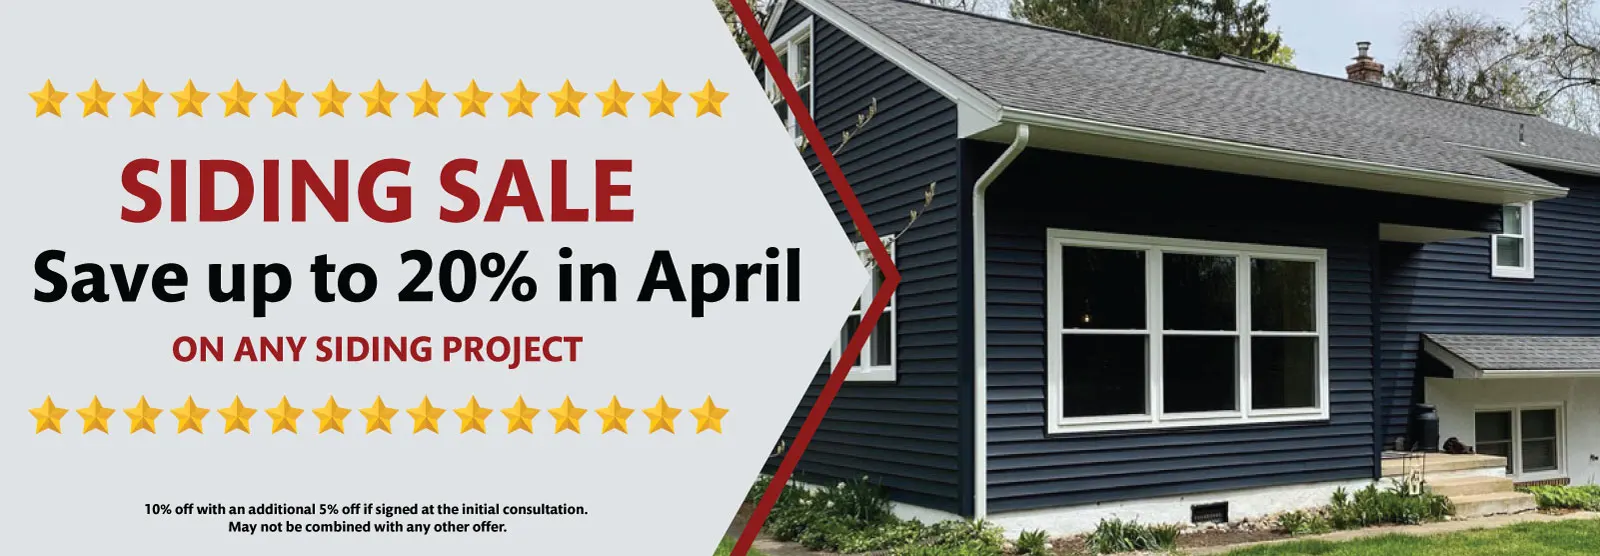 SIDING SALE! SAVE UP TO 15% ON ANY SIDING PROJECT